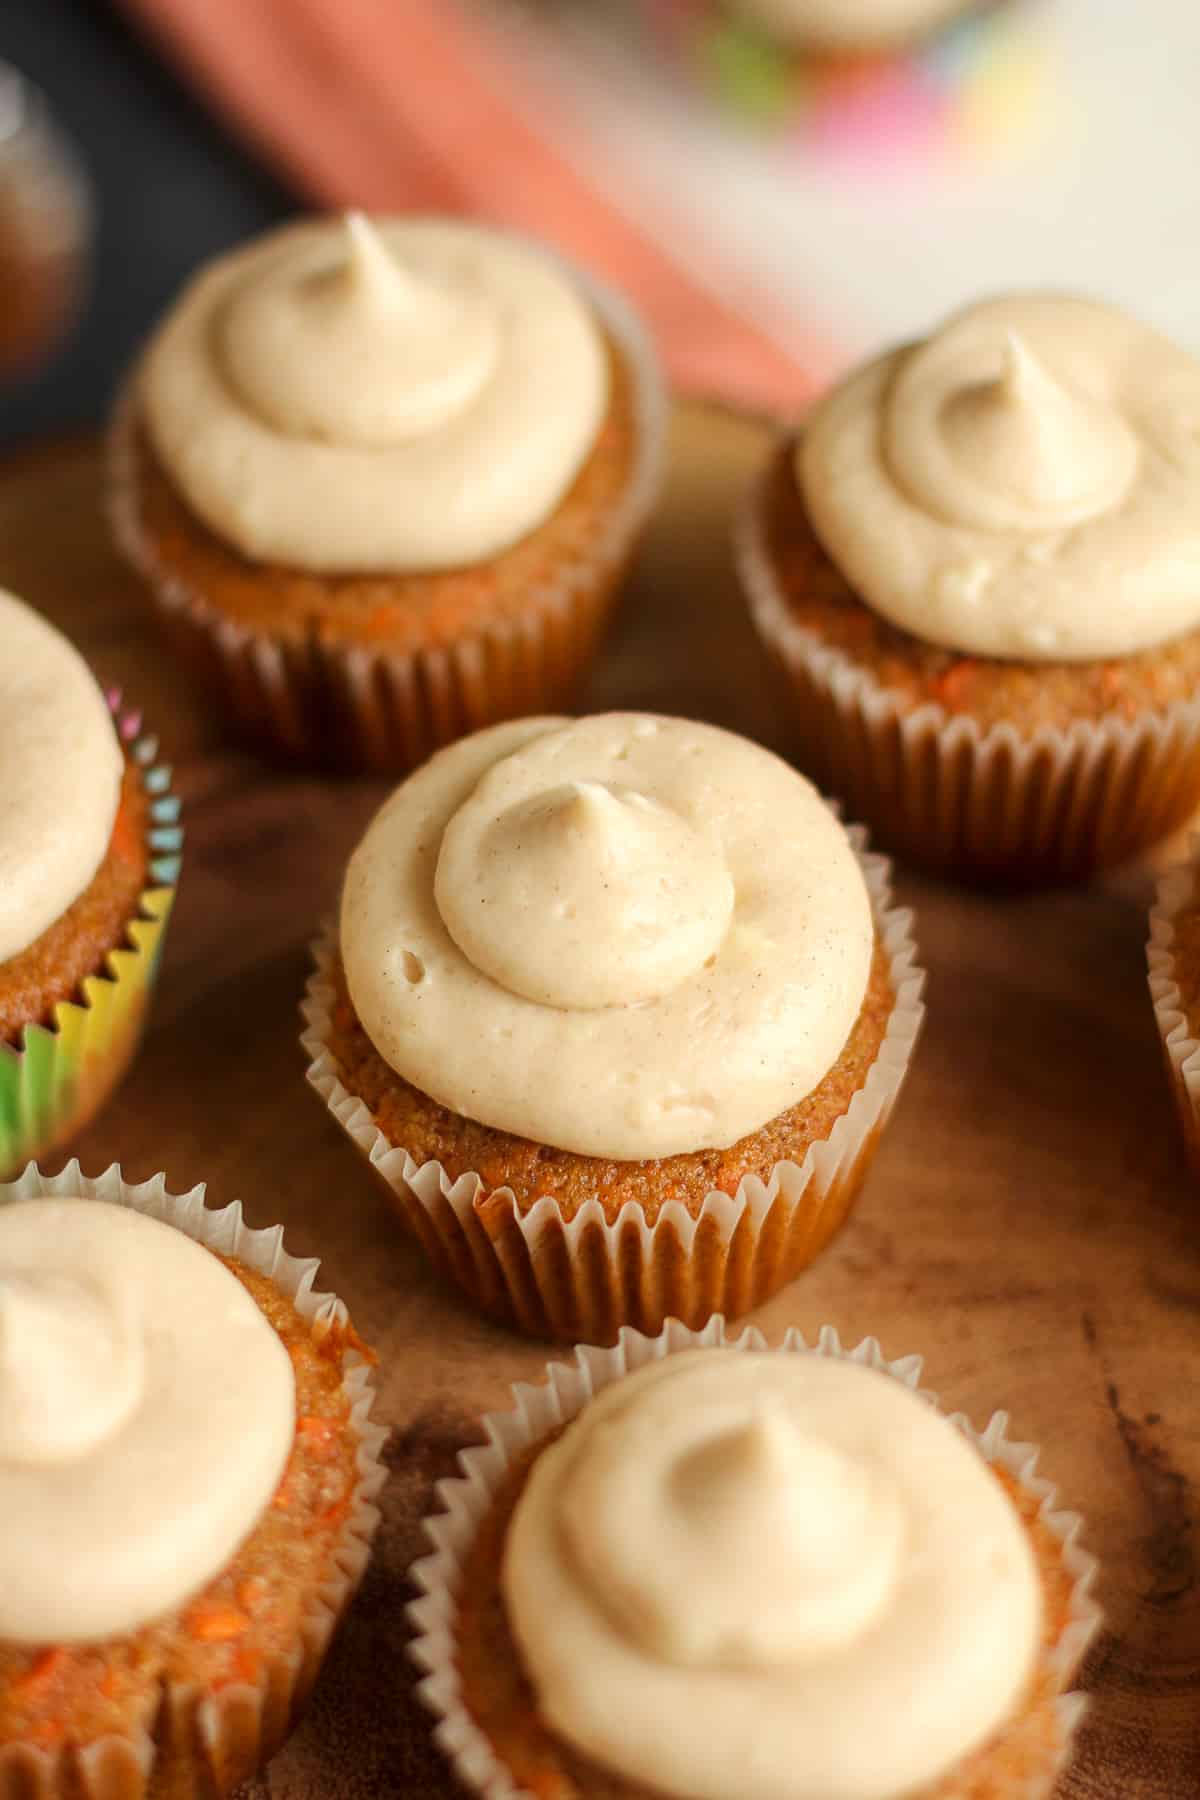 Overhead view of several carrot cake cupcakes with cream cheese frosting.